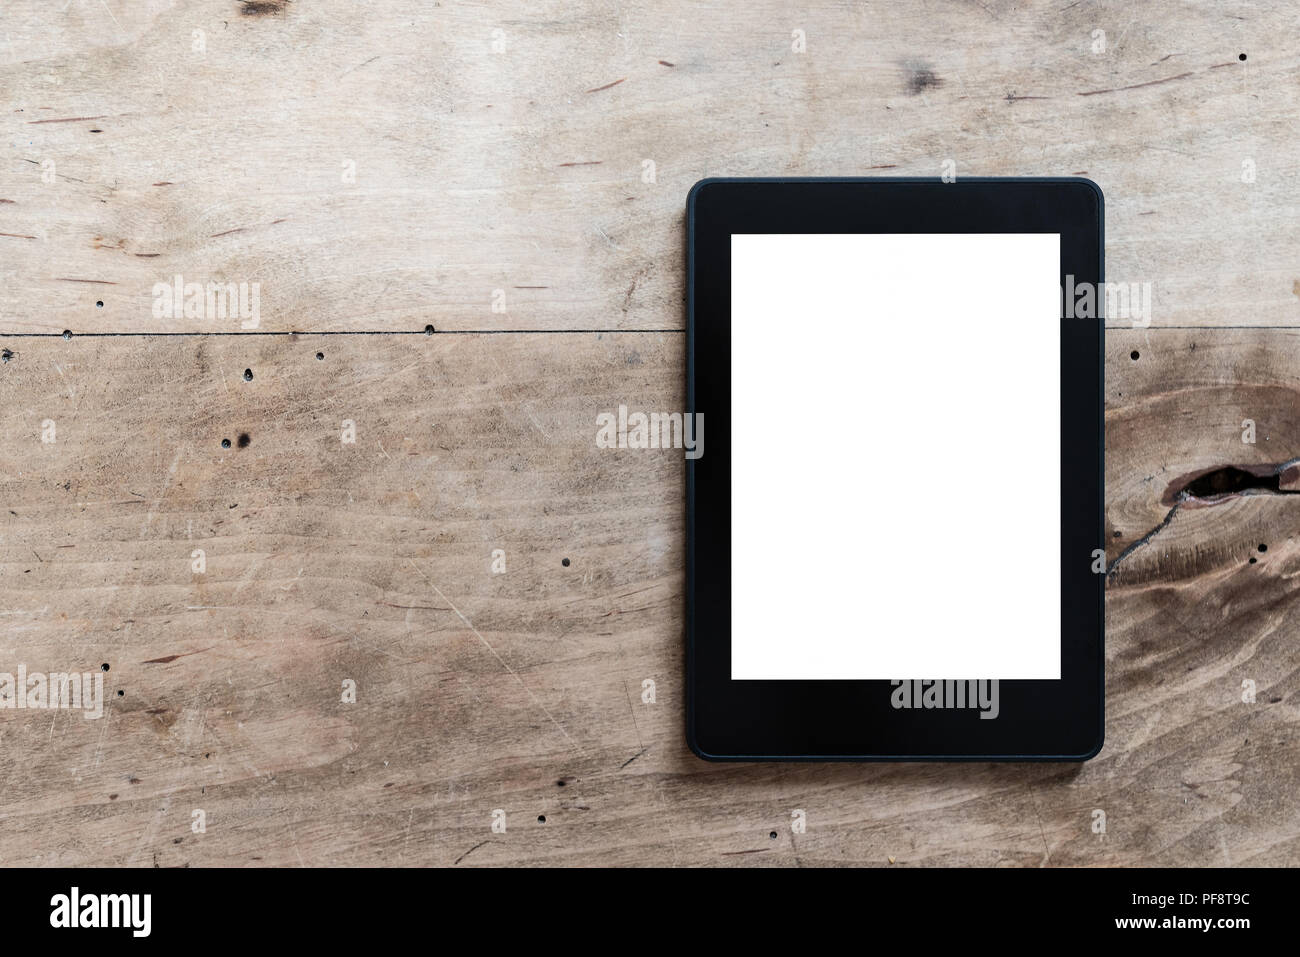 e-book reader or digital tablet on rustic wooden table Stock Photo